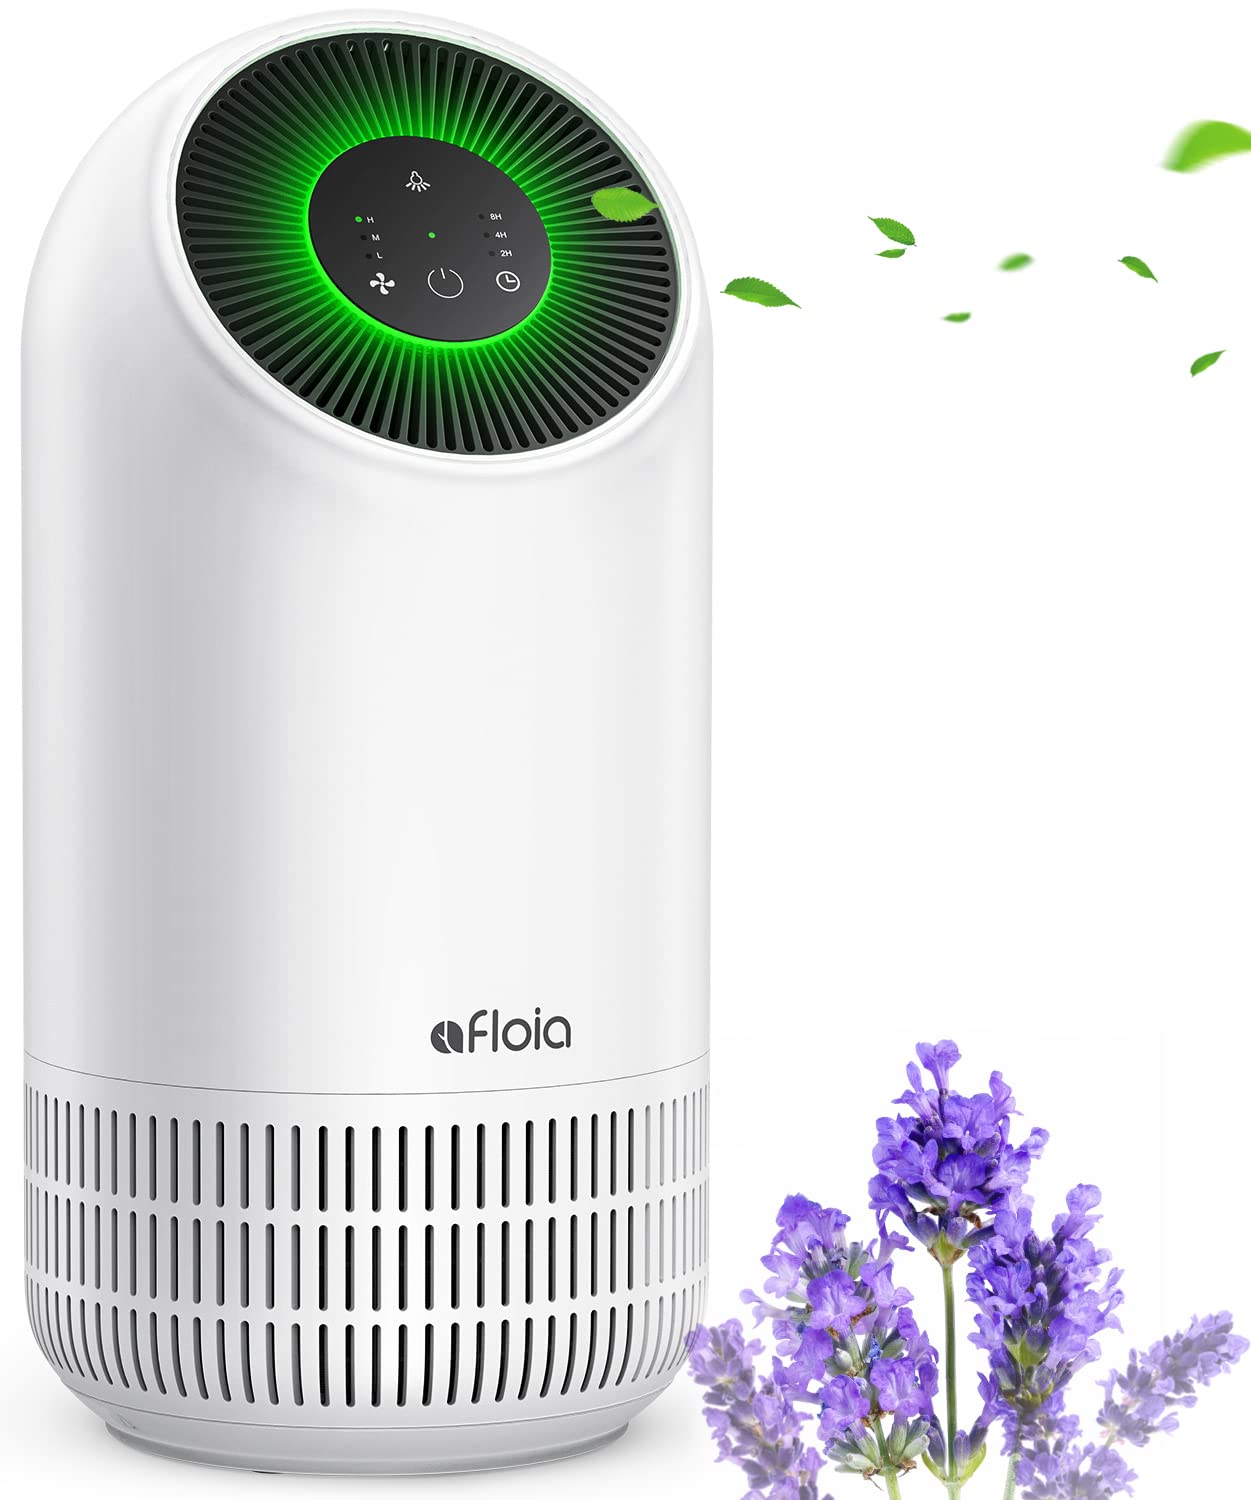 Afloia Air Purifier with Essential Oil Diffuser